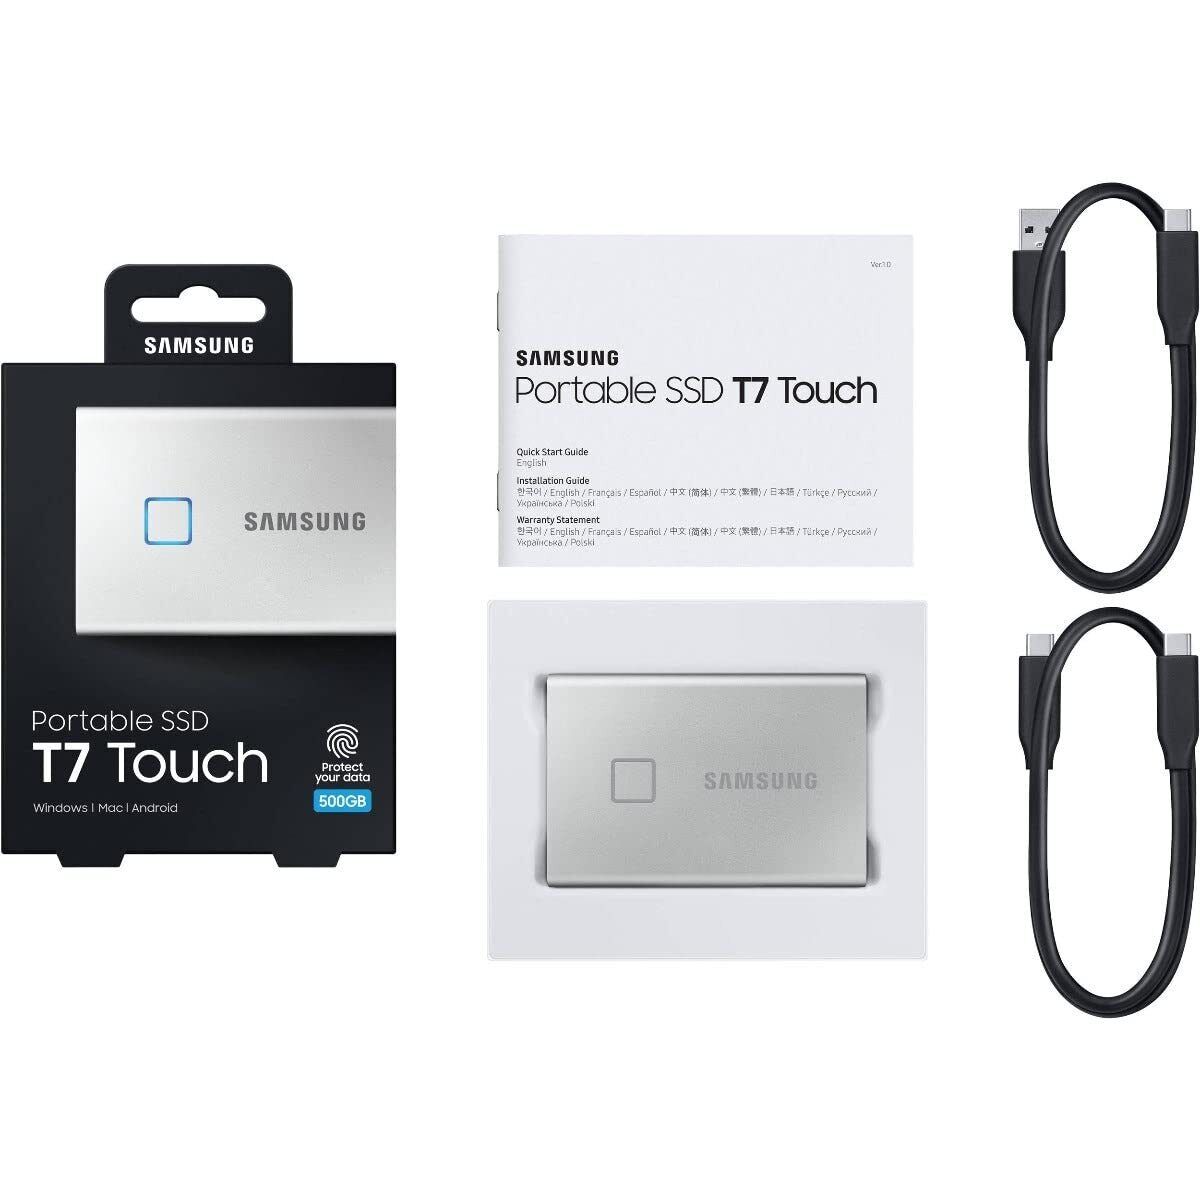 Open box, SAMSUNG SSD T7 Portable External Solid State Drive 500GB, US_392,AM,